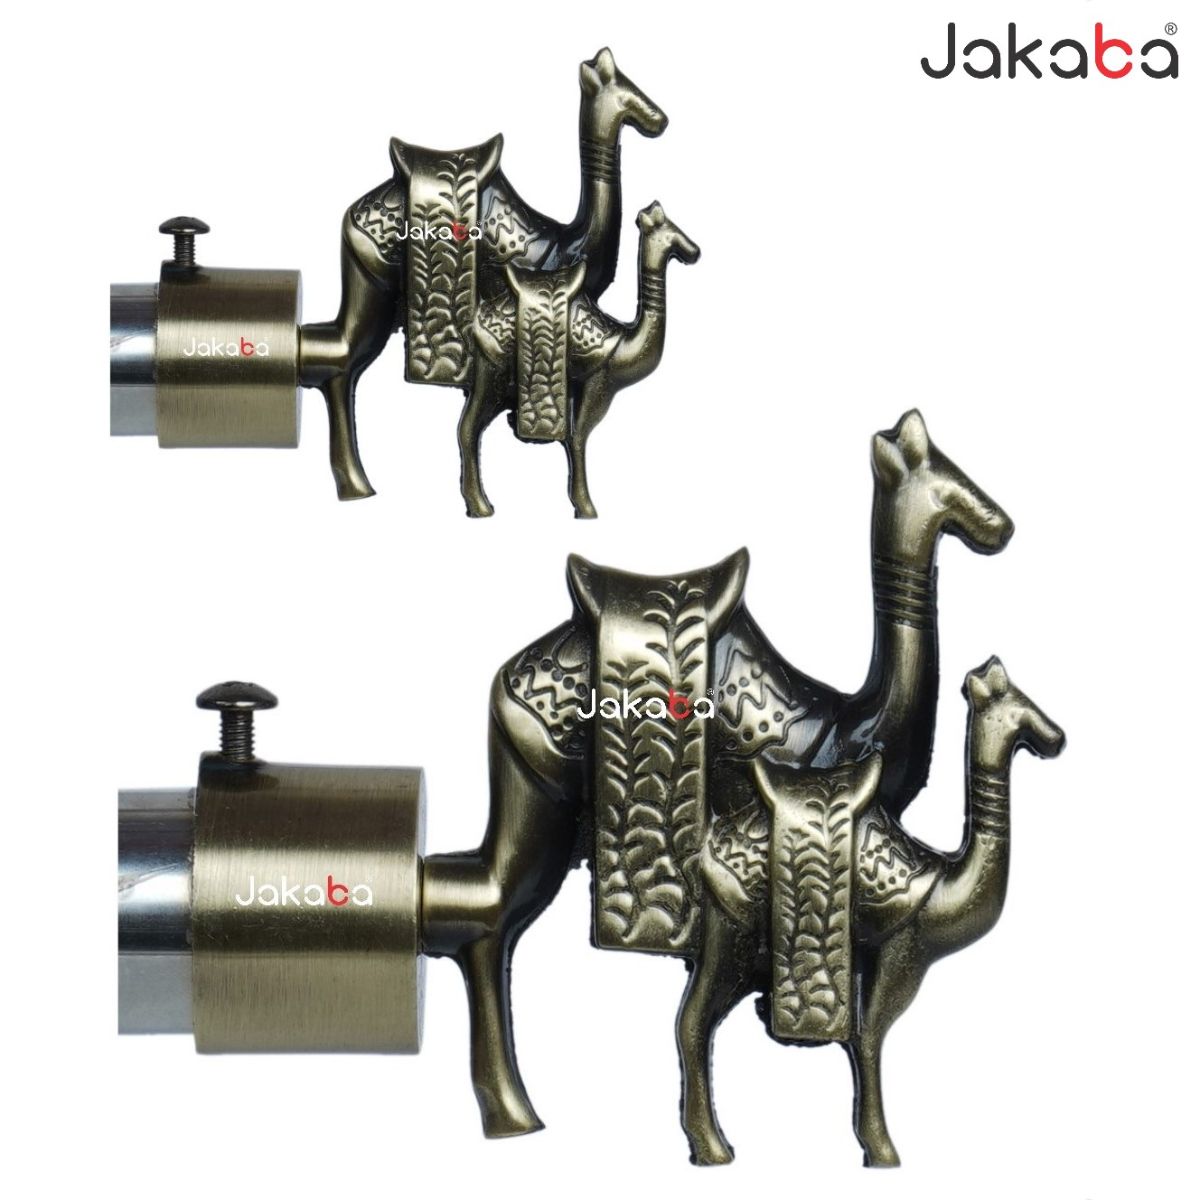 JAKABA Antique Brass Curtain Finials (Without Supports) - Pack Of 2 Pcs (1  Pair) : Curtain Brackets Set/Holders - JKBATQ944-01-WOS : Jakaba : Online  Hardware and Interior Store